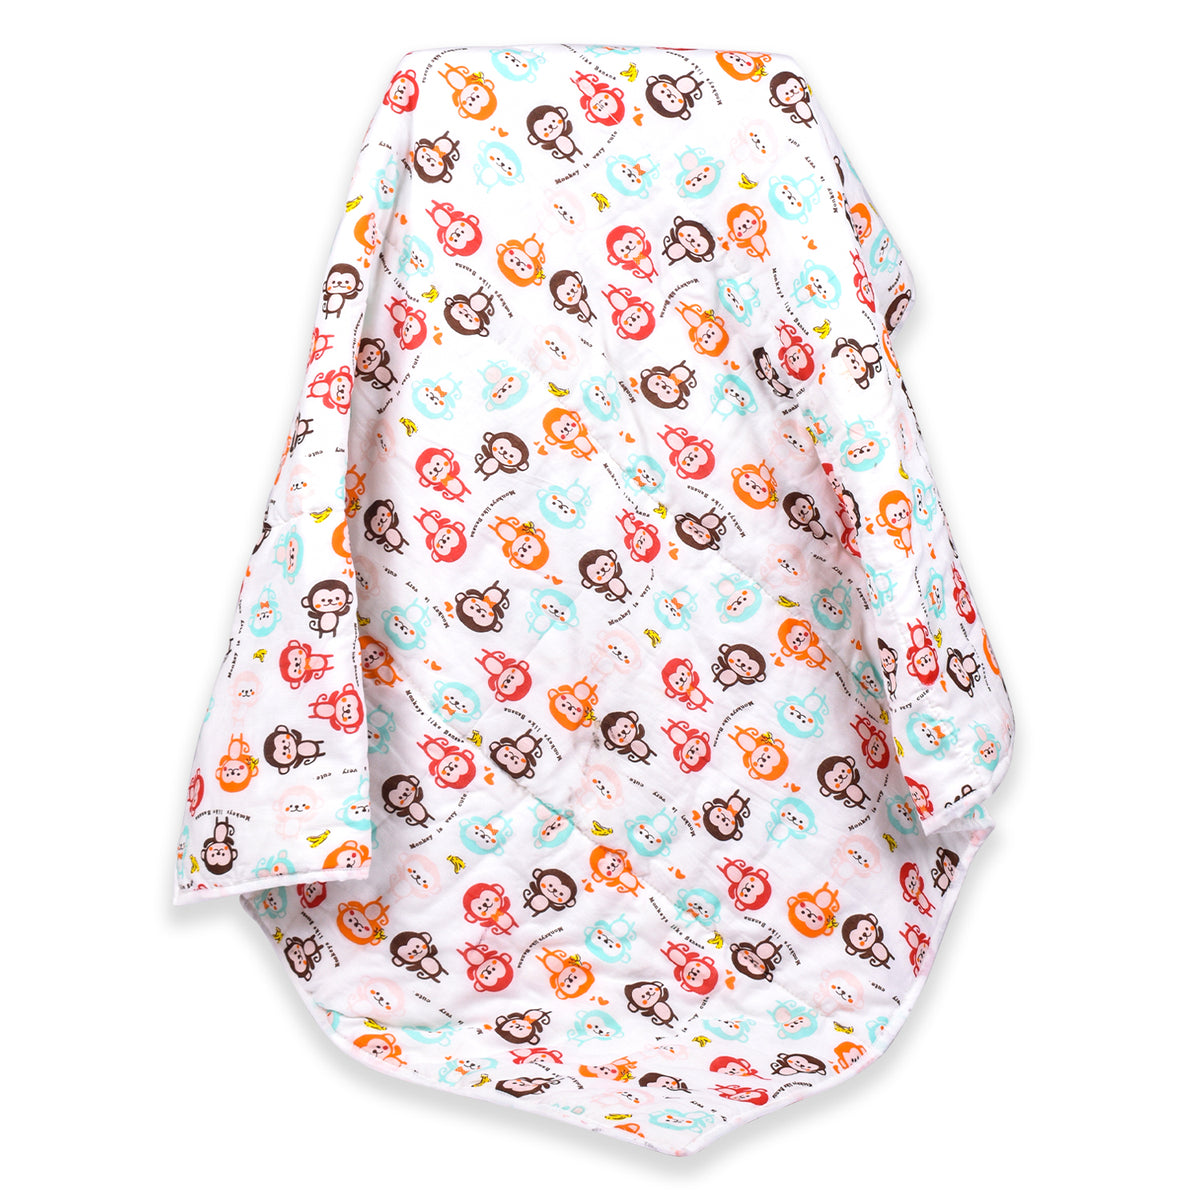 Baby AC Quilt Organic Cotton  - Colorful Monkey - 0-3 Years - 110X120Cms